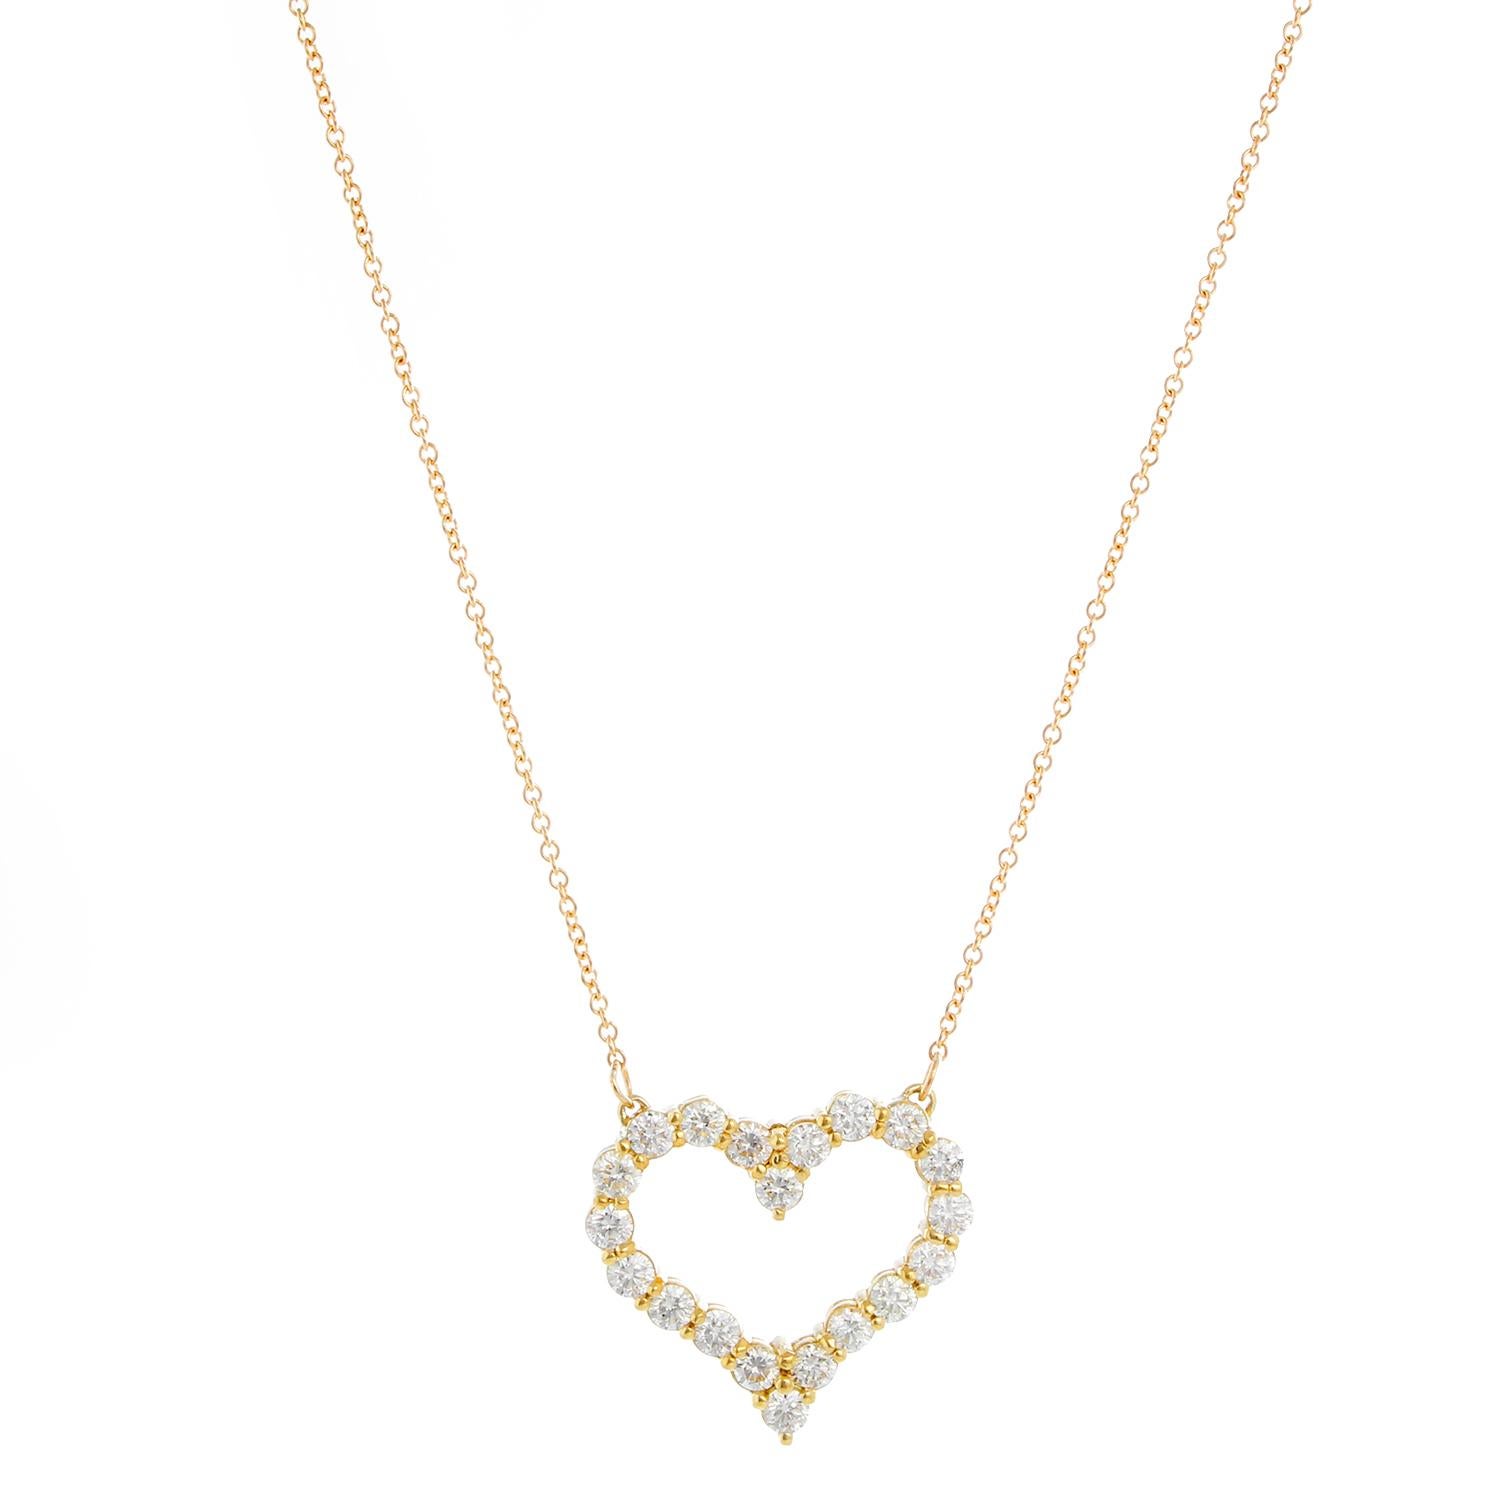 Beautiful heart pendant with 20 round brilliant diamonds set in 18K Yellow gold.  Weighing 3.22 cts. Clarity VS/SI1. Color H . Length 22 inches with 2